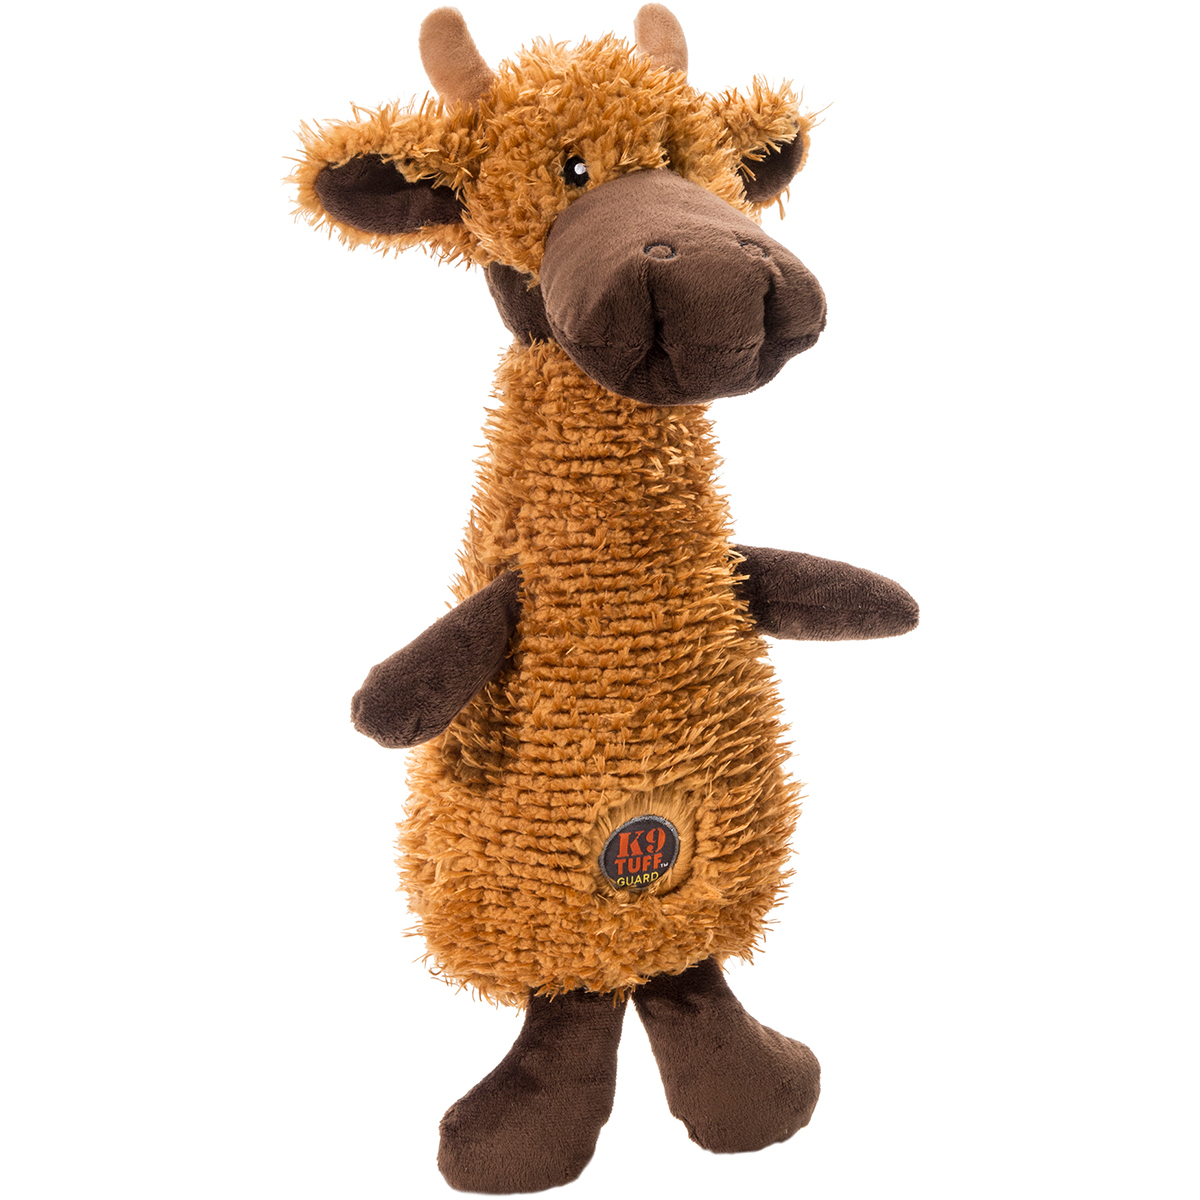 Charming Pet 61380s Moose - Scruffles Pet Toy, Small - 3.5 X 5.5 X 11 In.